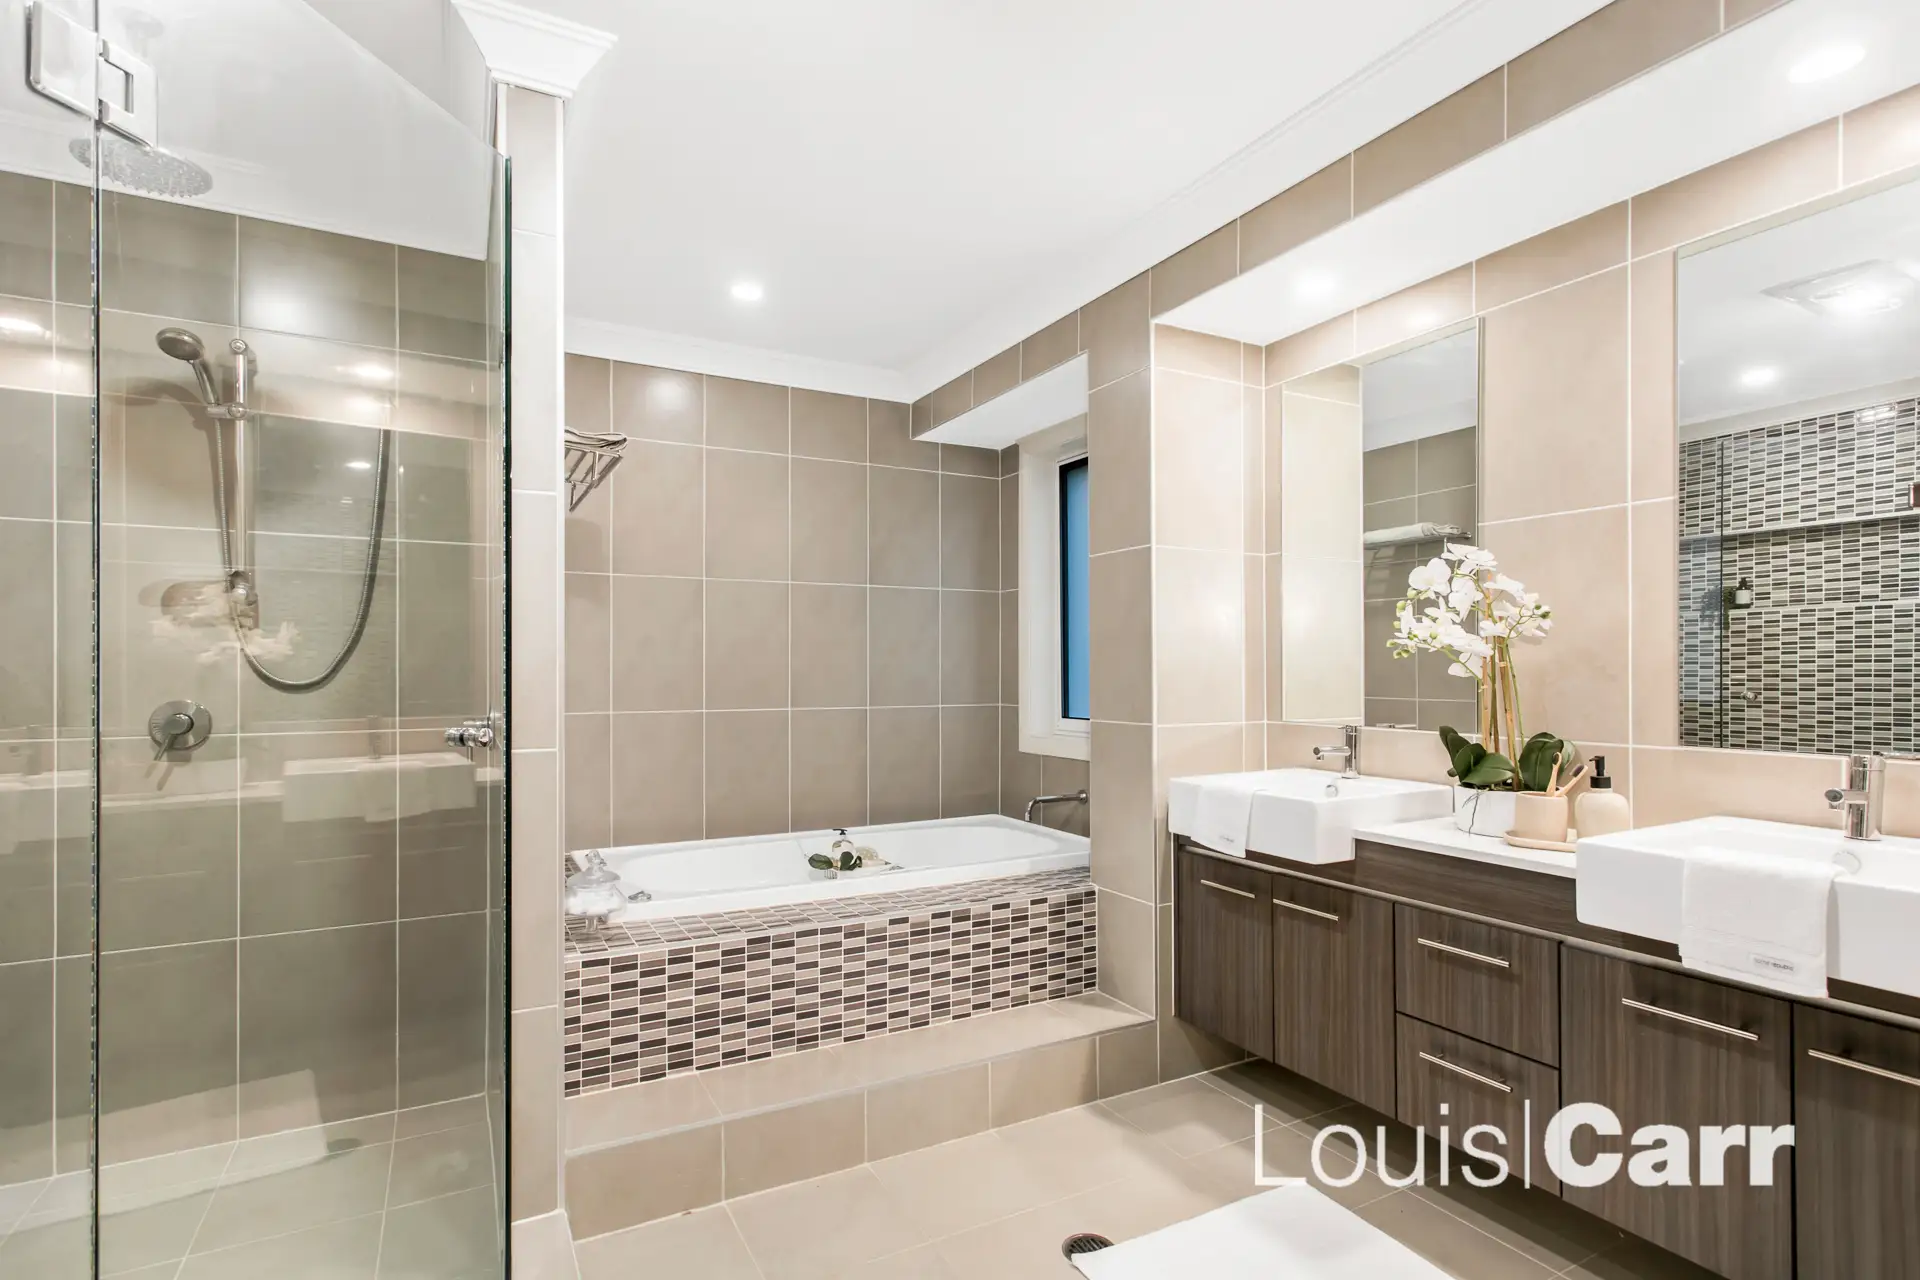 Photo #8: 151 Oratava Avenue, West Pennant Hills - Sold by Louis Carr Real Estate